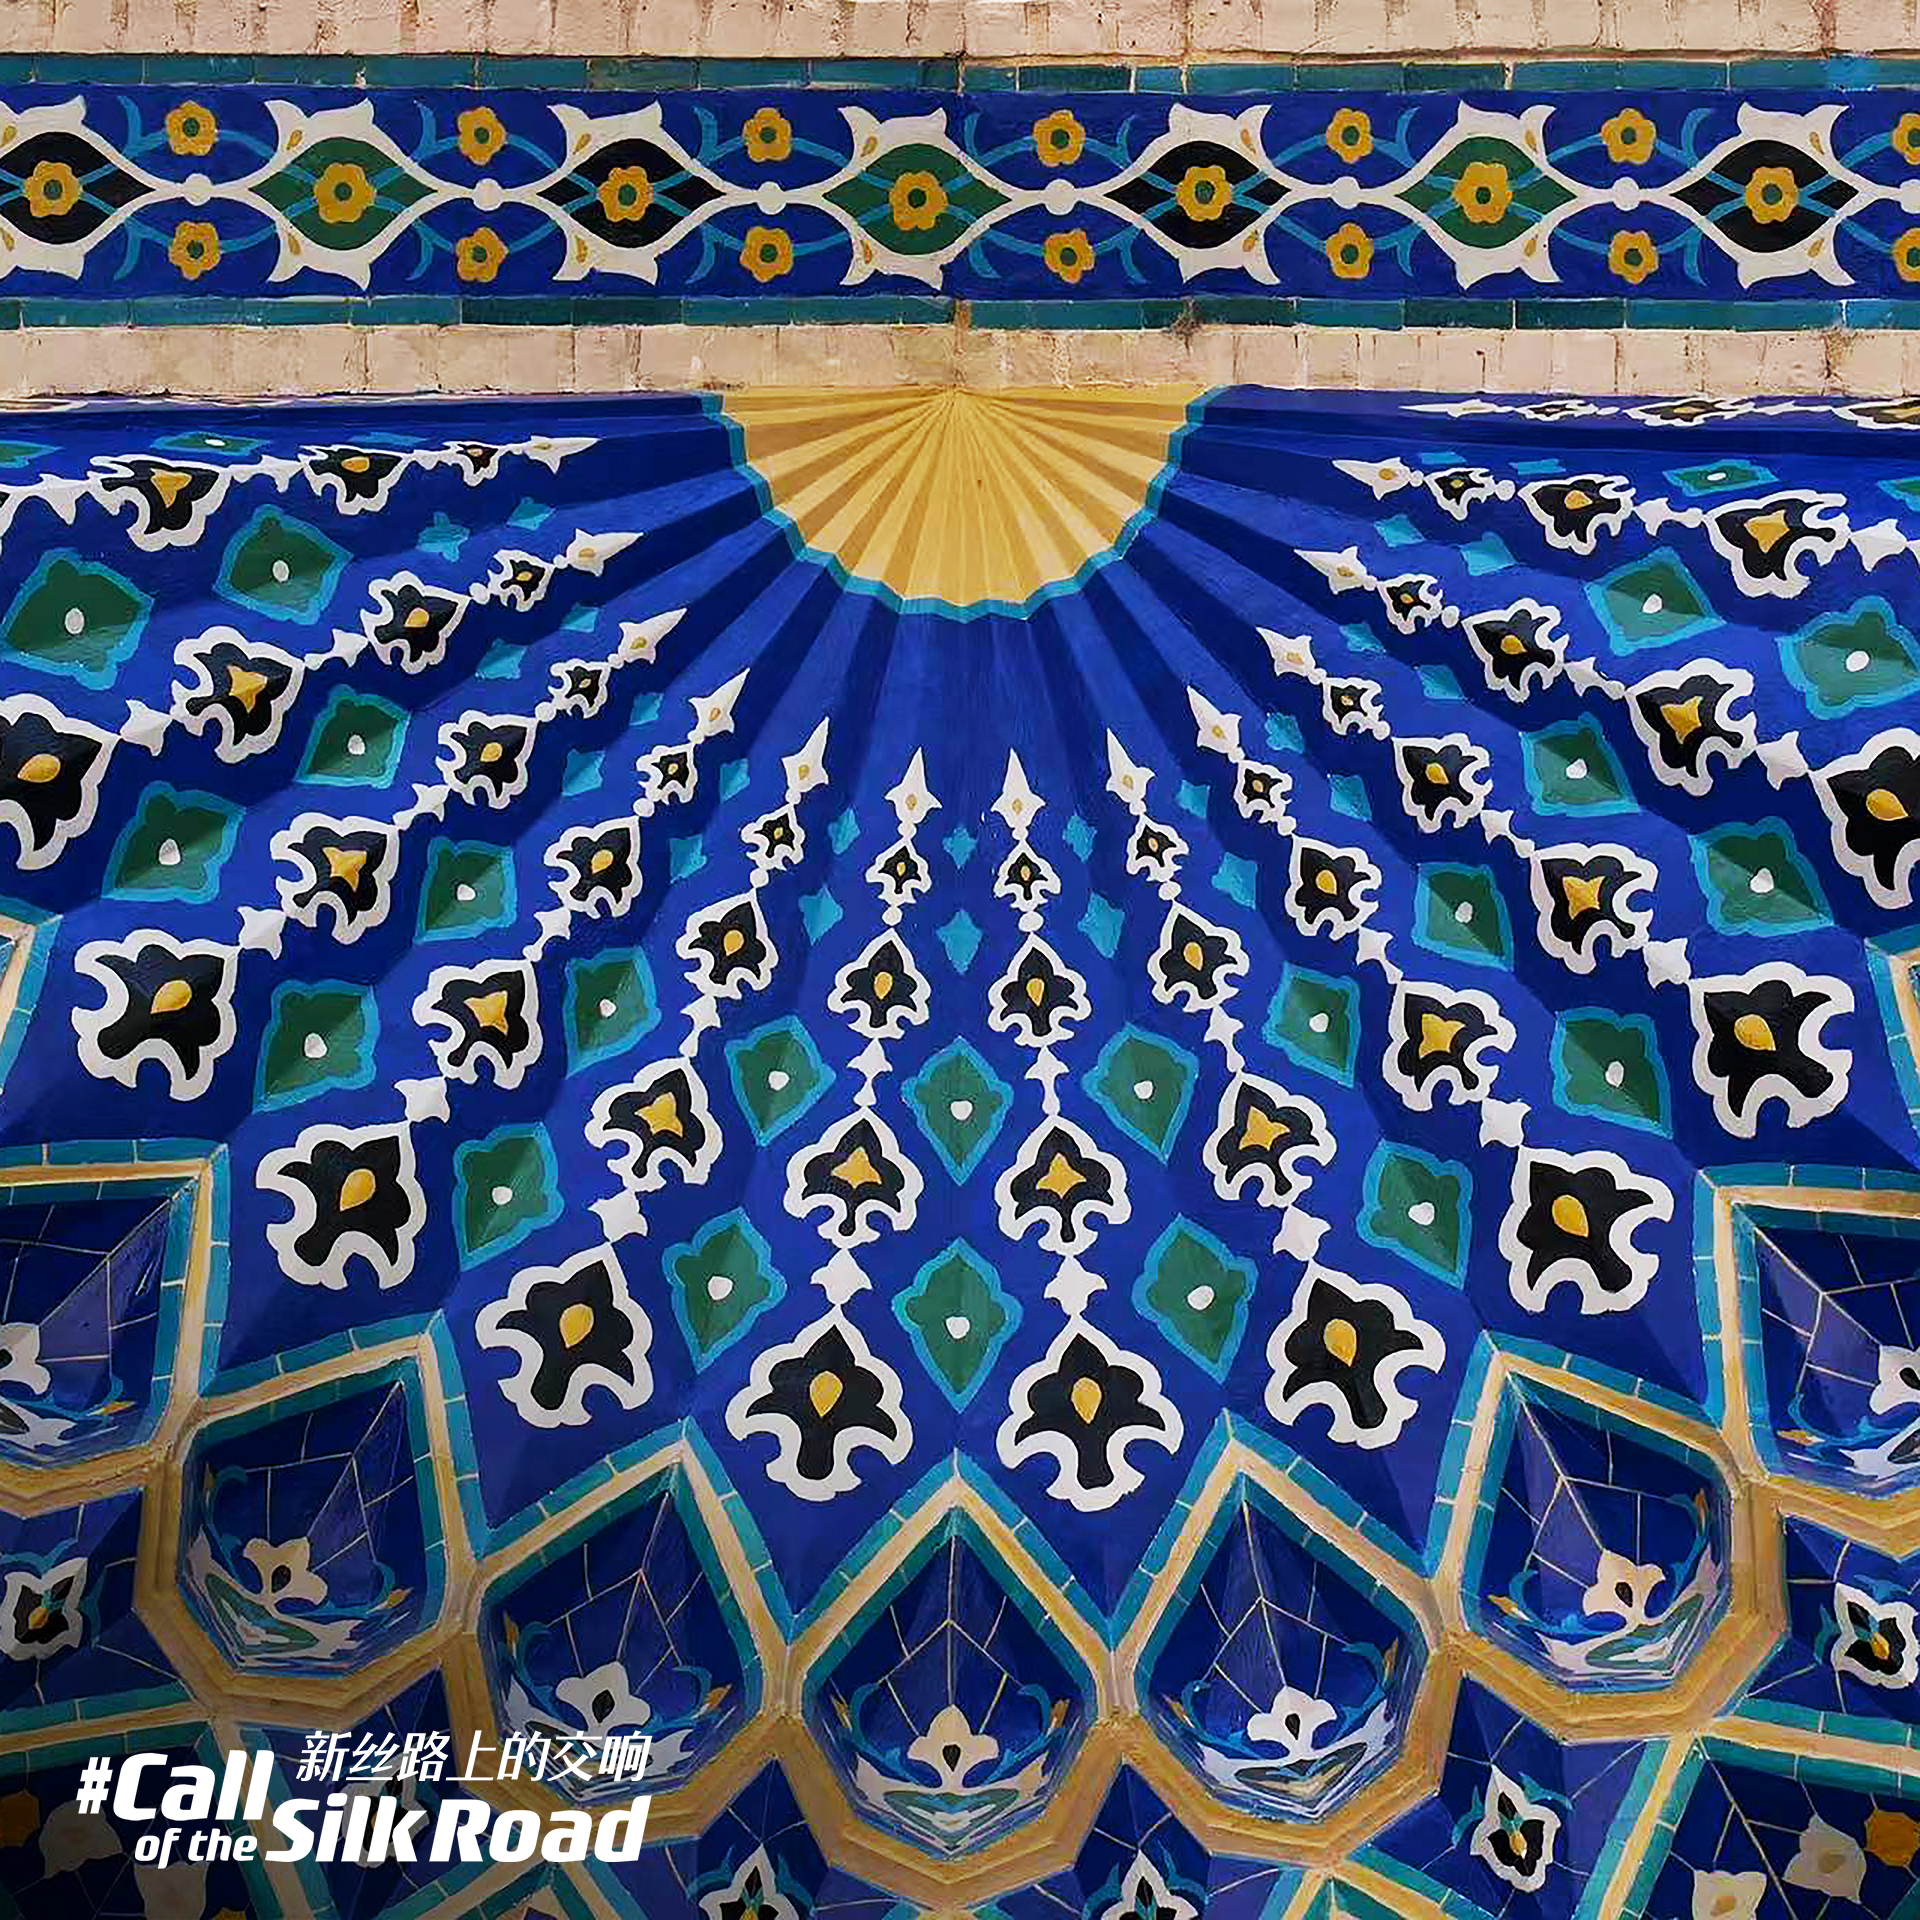 Samarkand's majestic mosques and mausoleums have been famous for centuries. /CGTN